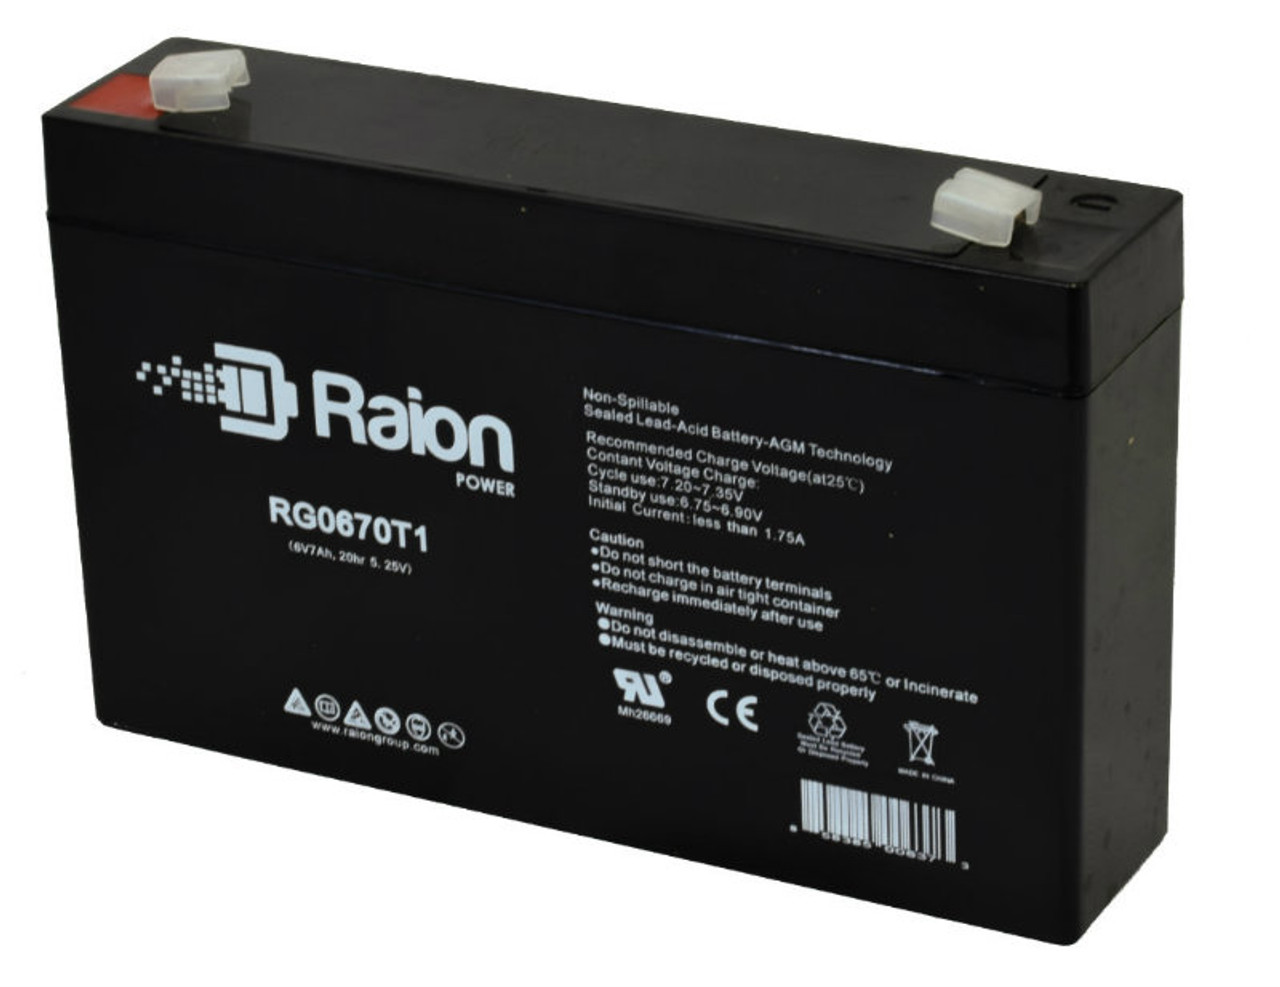 Raion Power RG0670T1 Replacement Battery for Japan PE4V4.5 OEM Battery